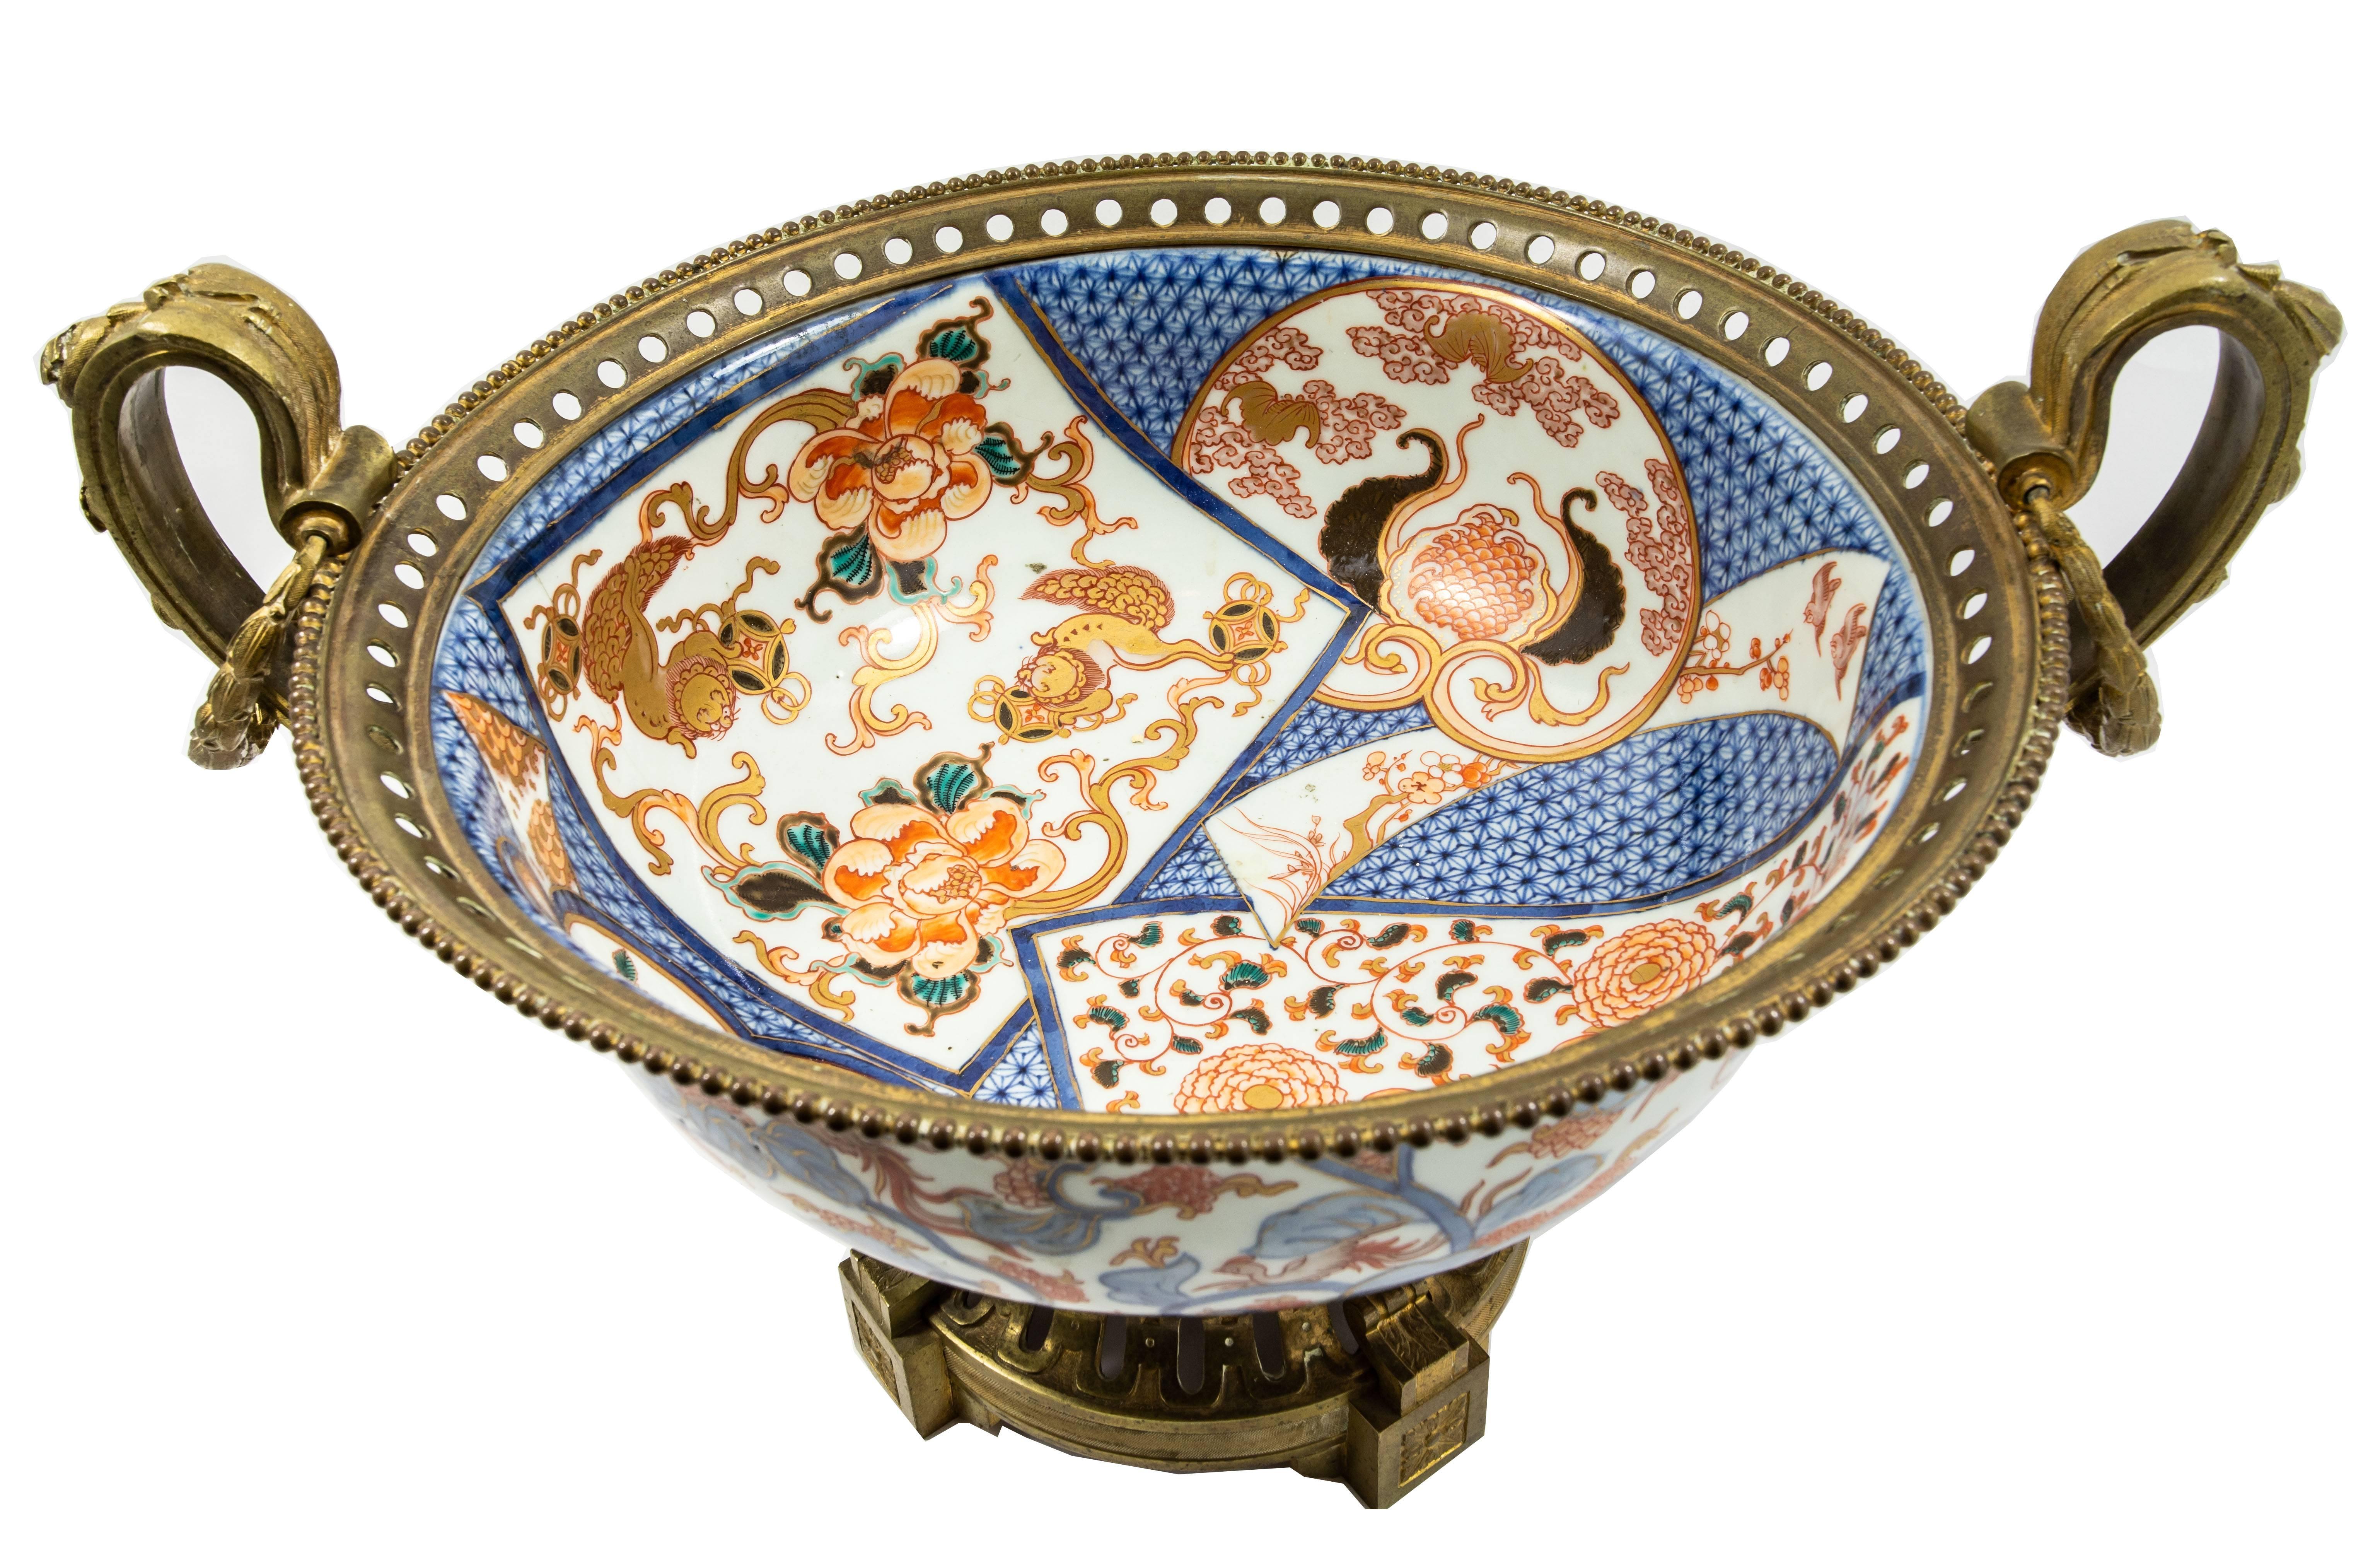 A very fine quality French 19th century bronze-mounted Imari porcelain centerpiece.
The Imari bowl is Chinese.
The bronze mounts are in Louis XVI style.